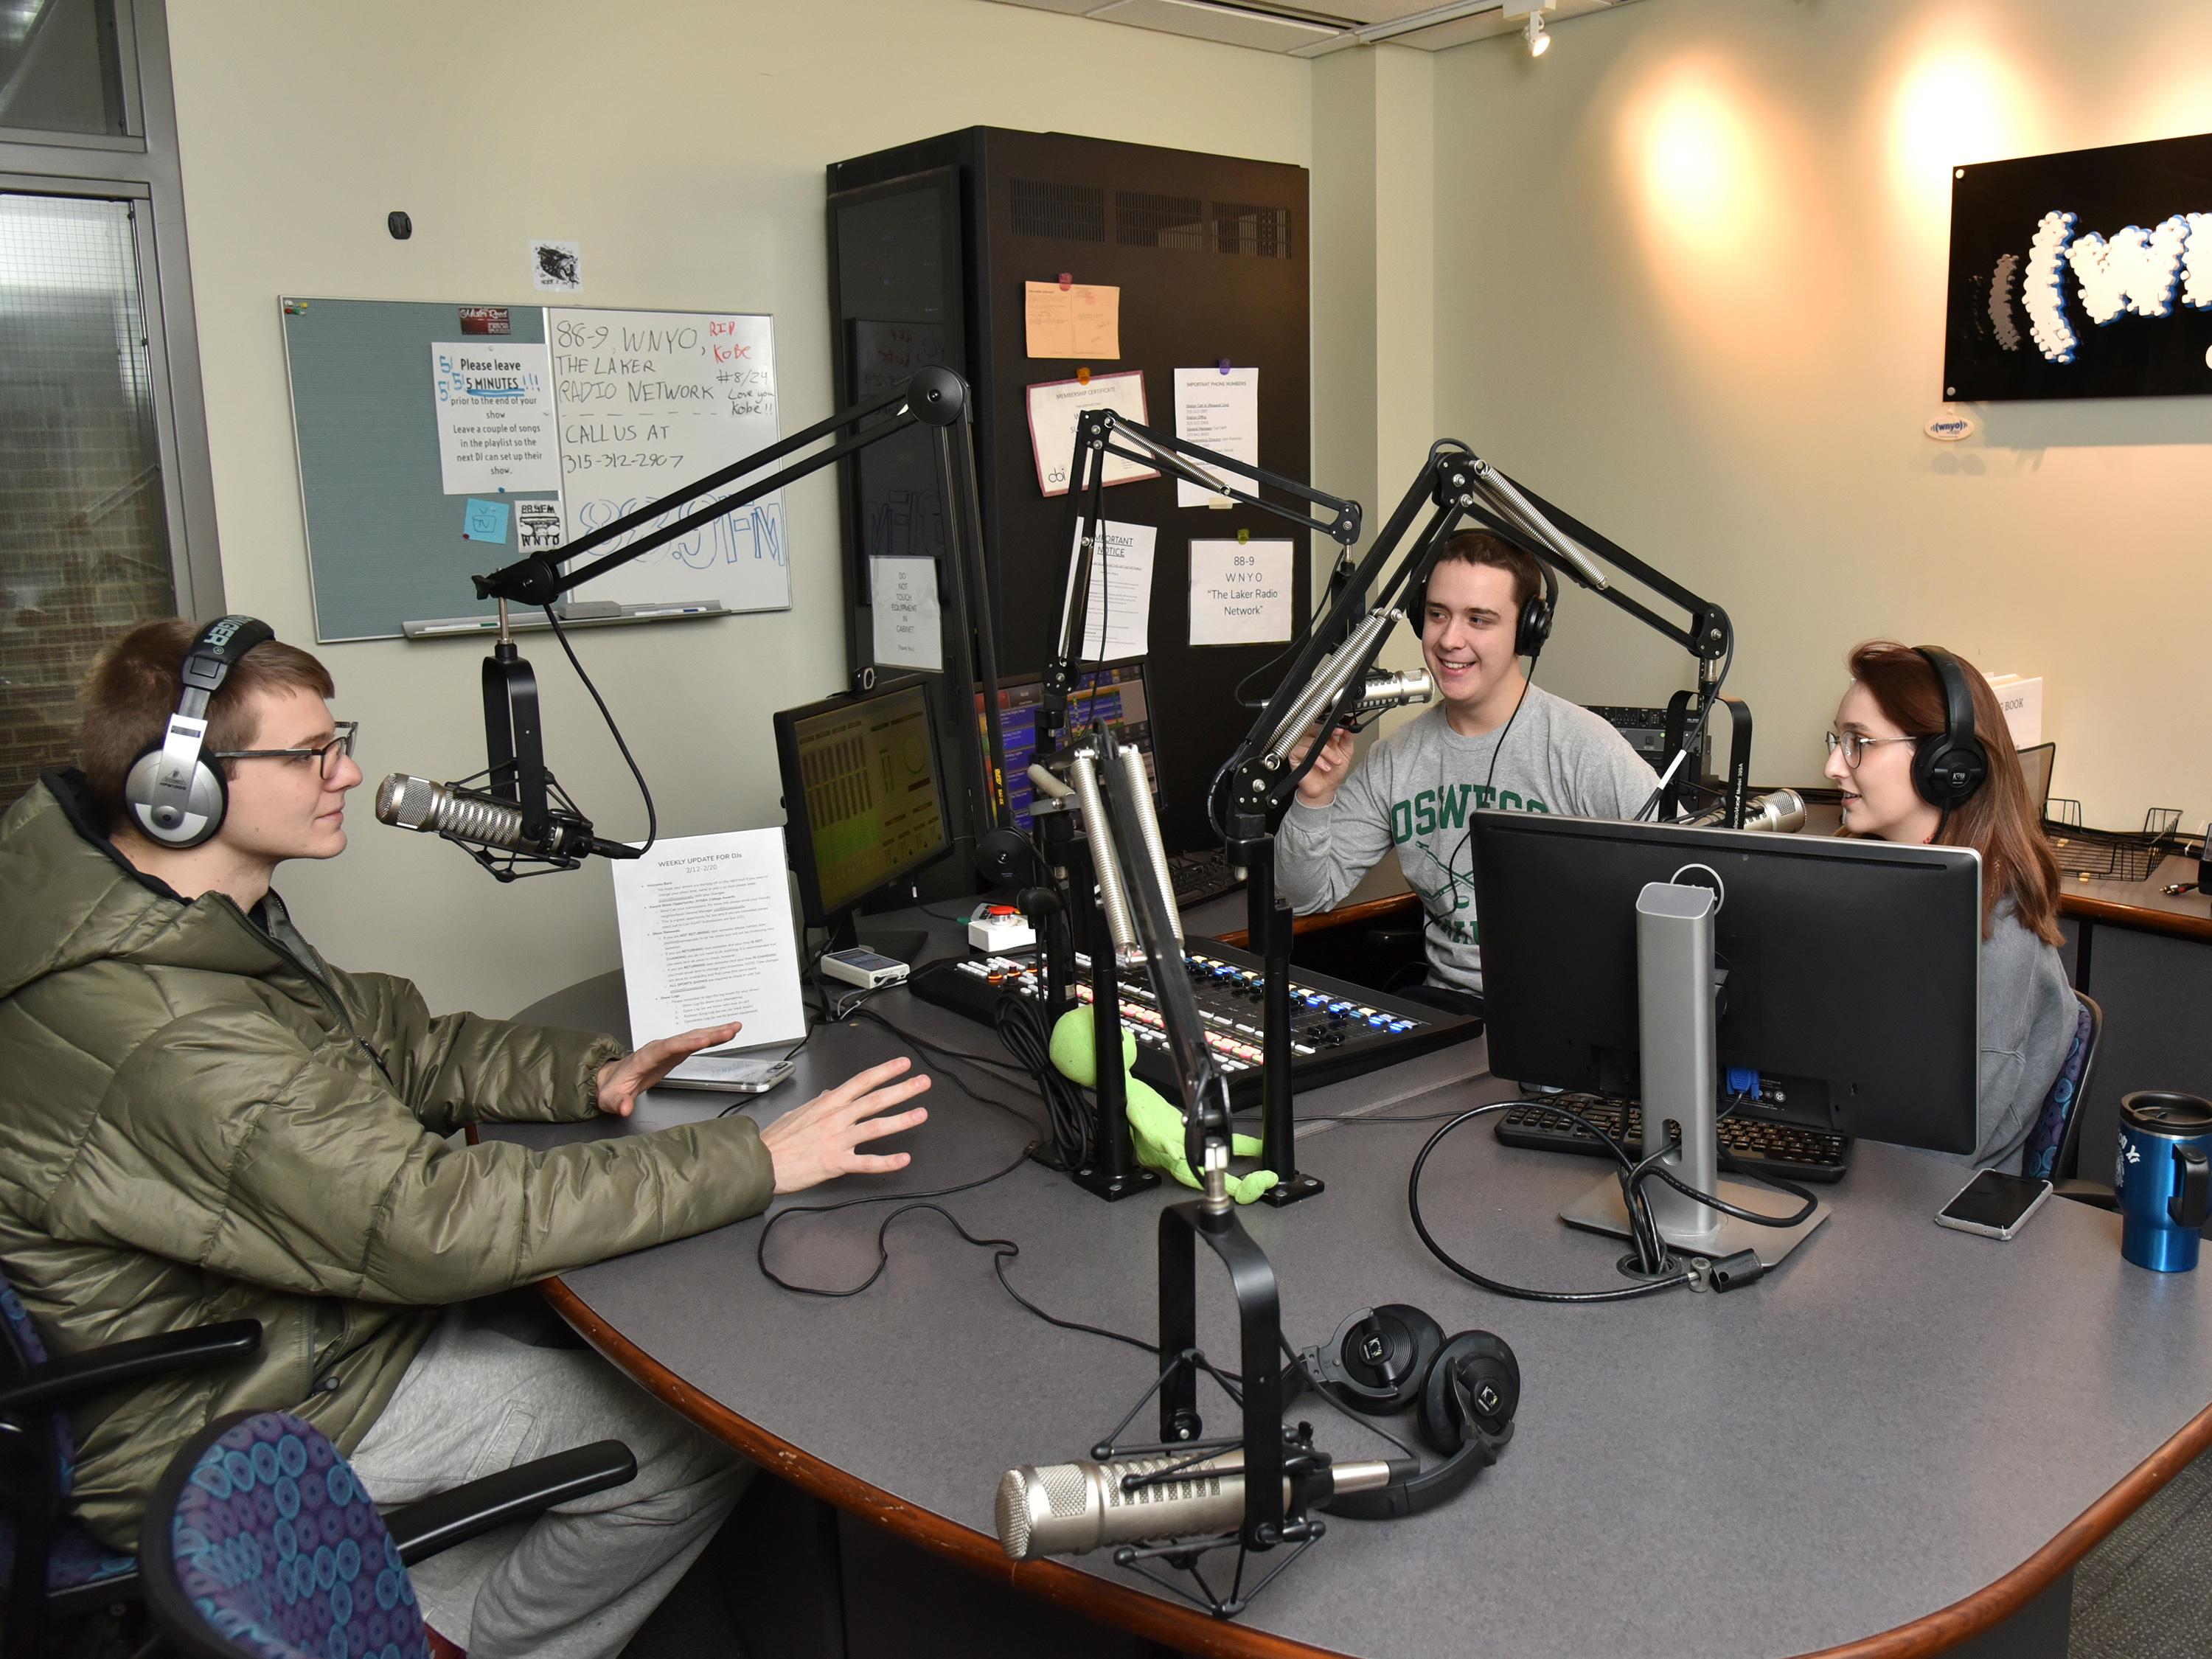 WNYO show Matt and Carl in the morning recently earned a national broadcasting award